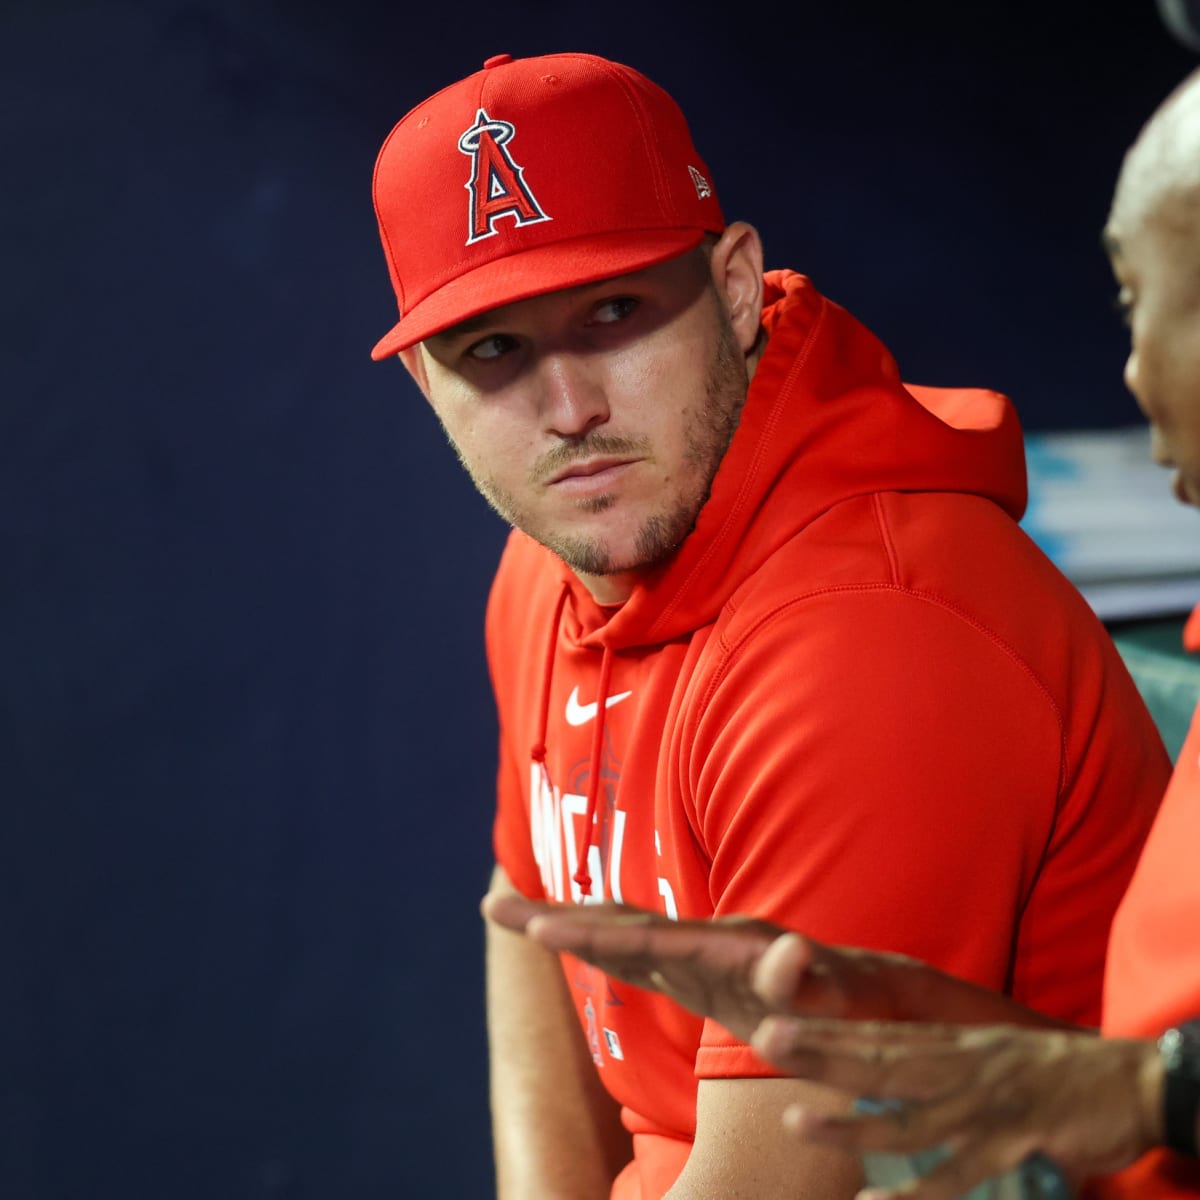 Coronavirus: Angels star Mike Trout is stuck at home too - Los Angeles Times